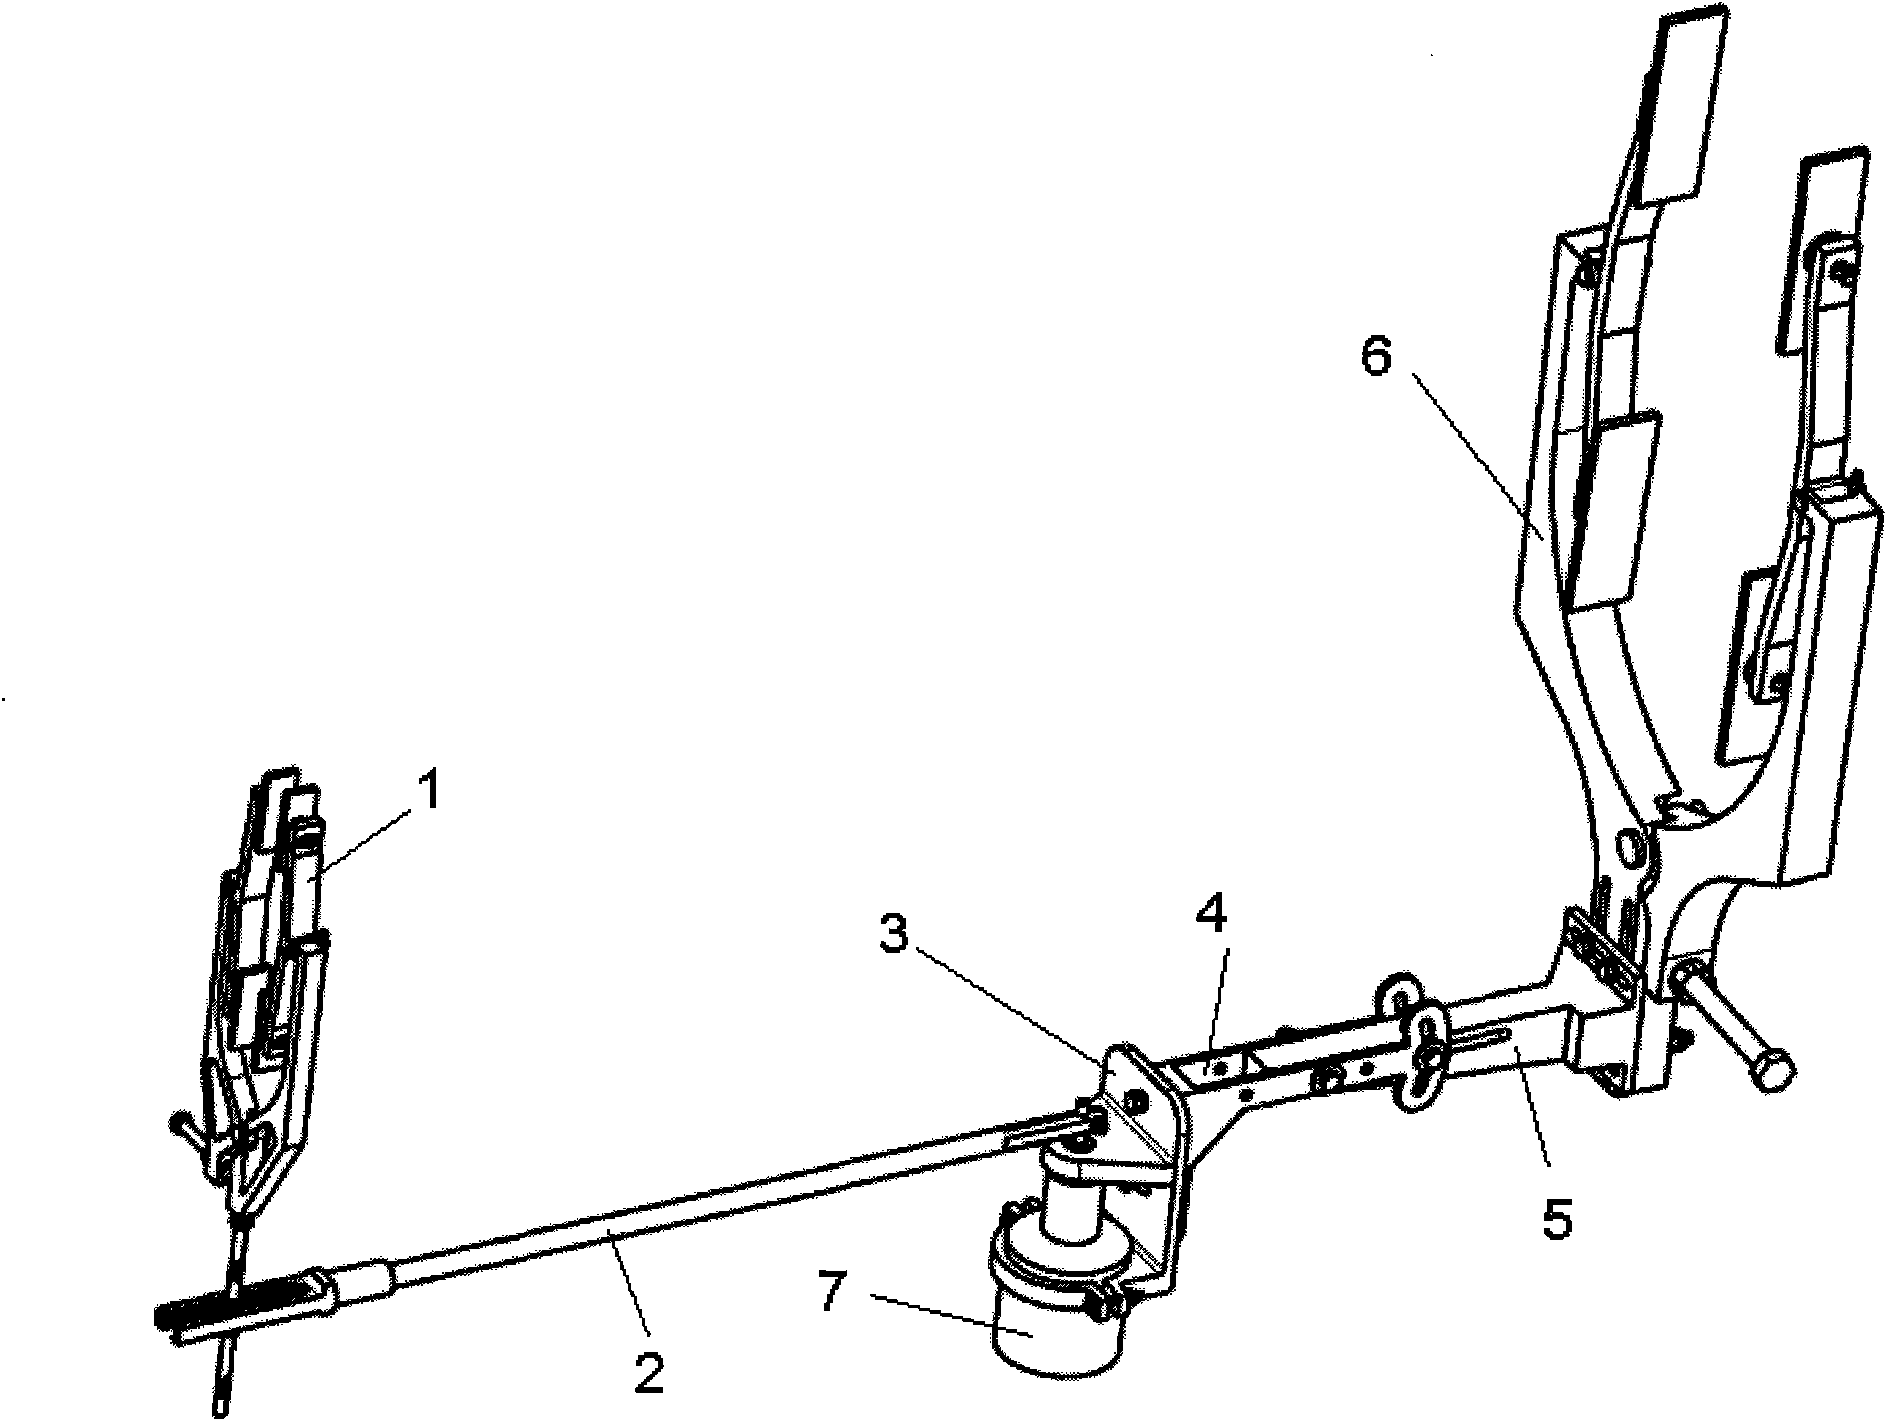 Tool and method for measuring deflection angle of airplane control surface